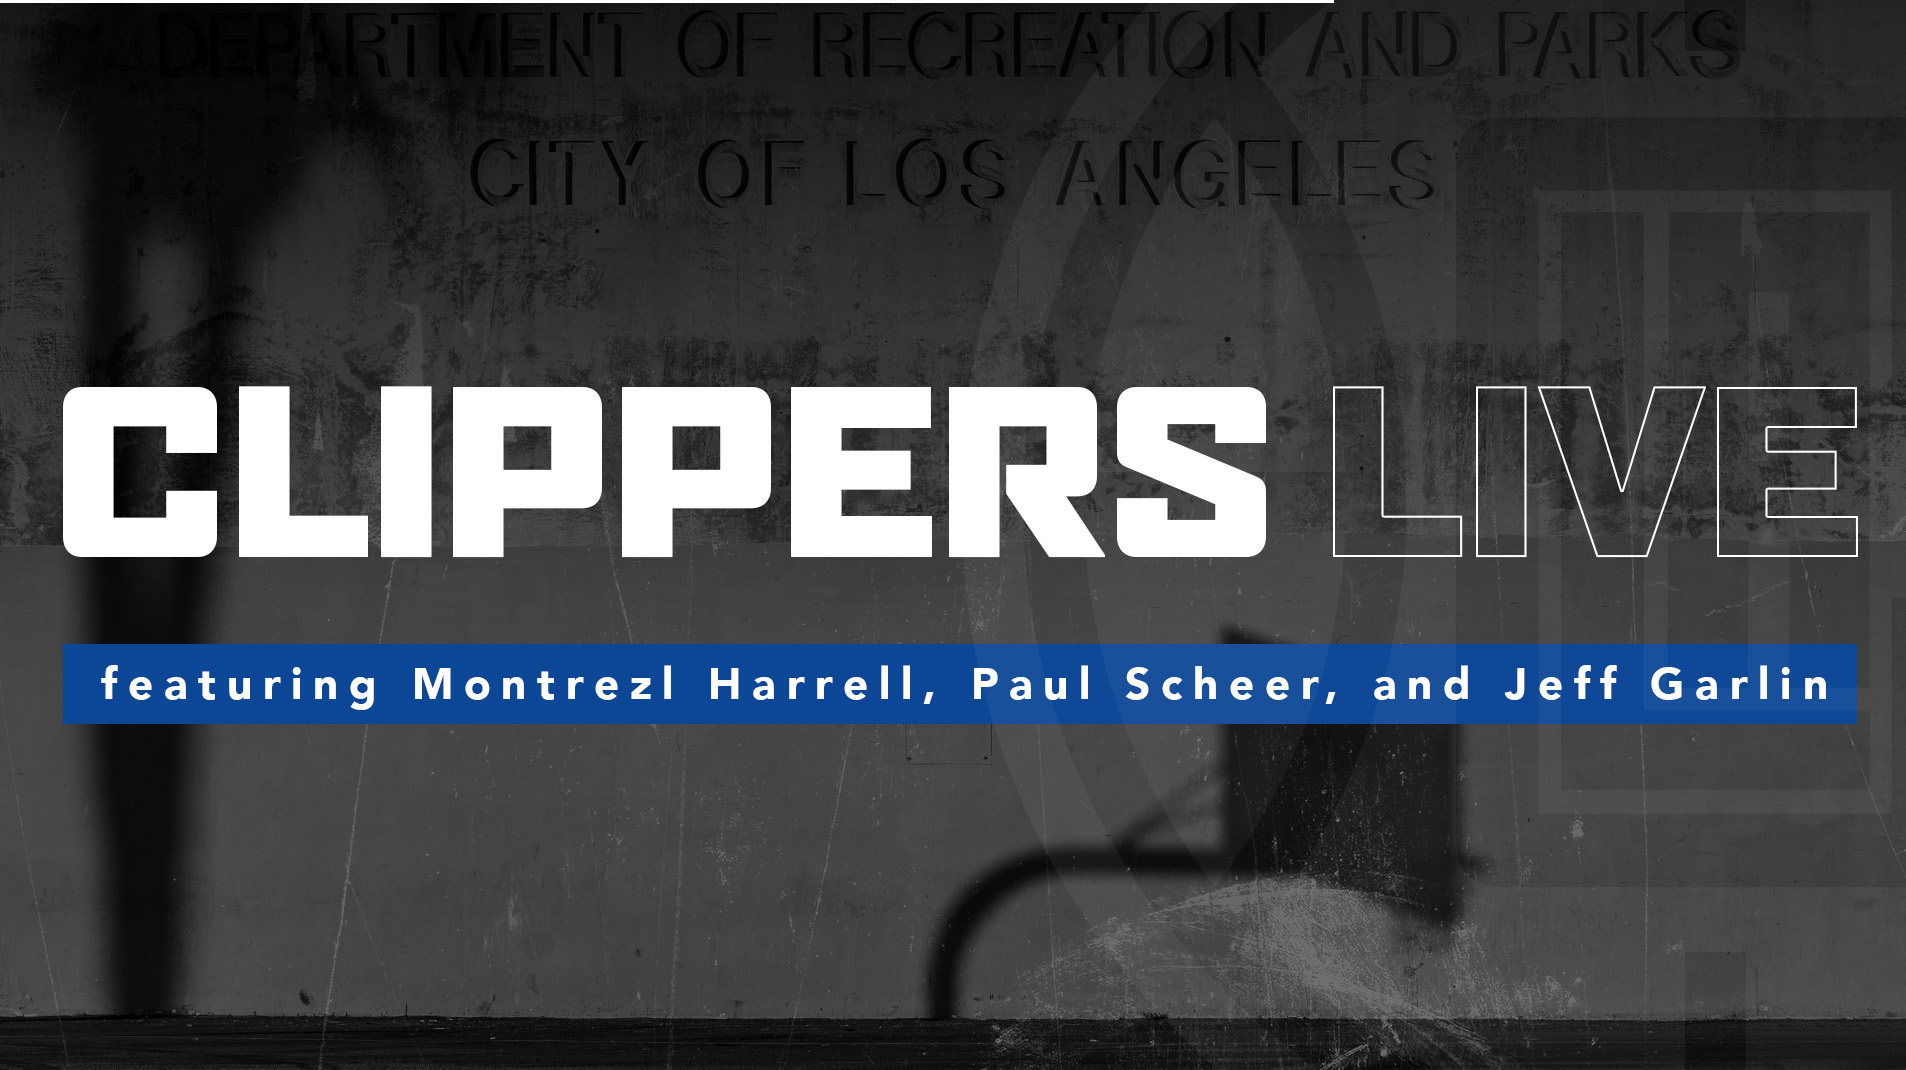 Los Angeles Clippers on Livestream